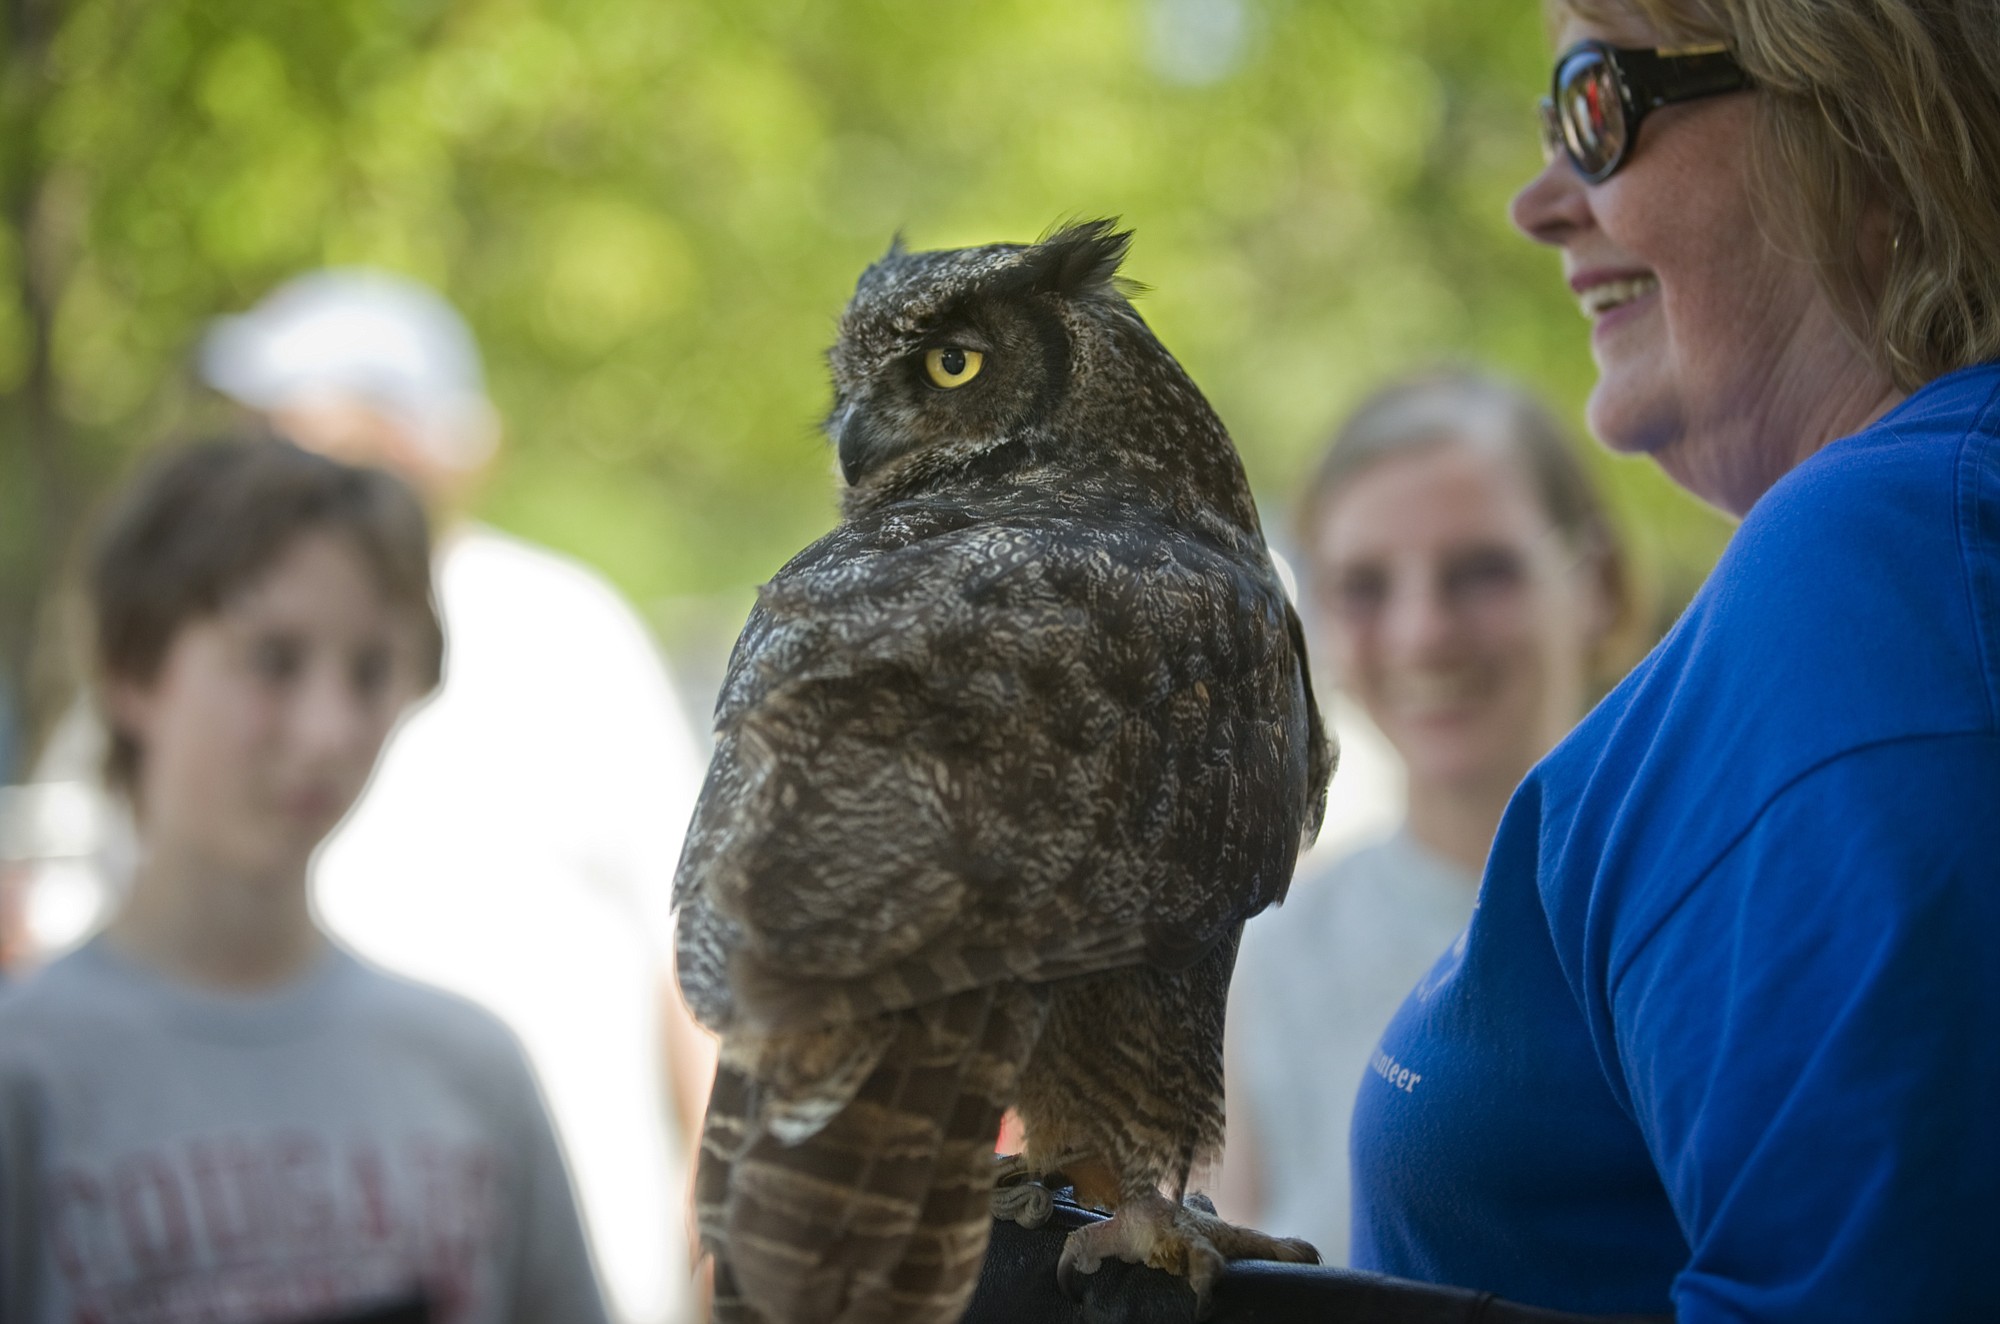 A live birds of prey presentation is part of the Sturgeon Festival today at the Water Resources Education Center.